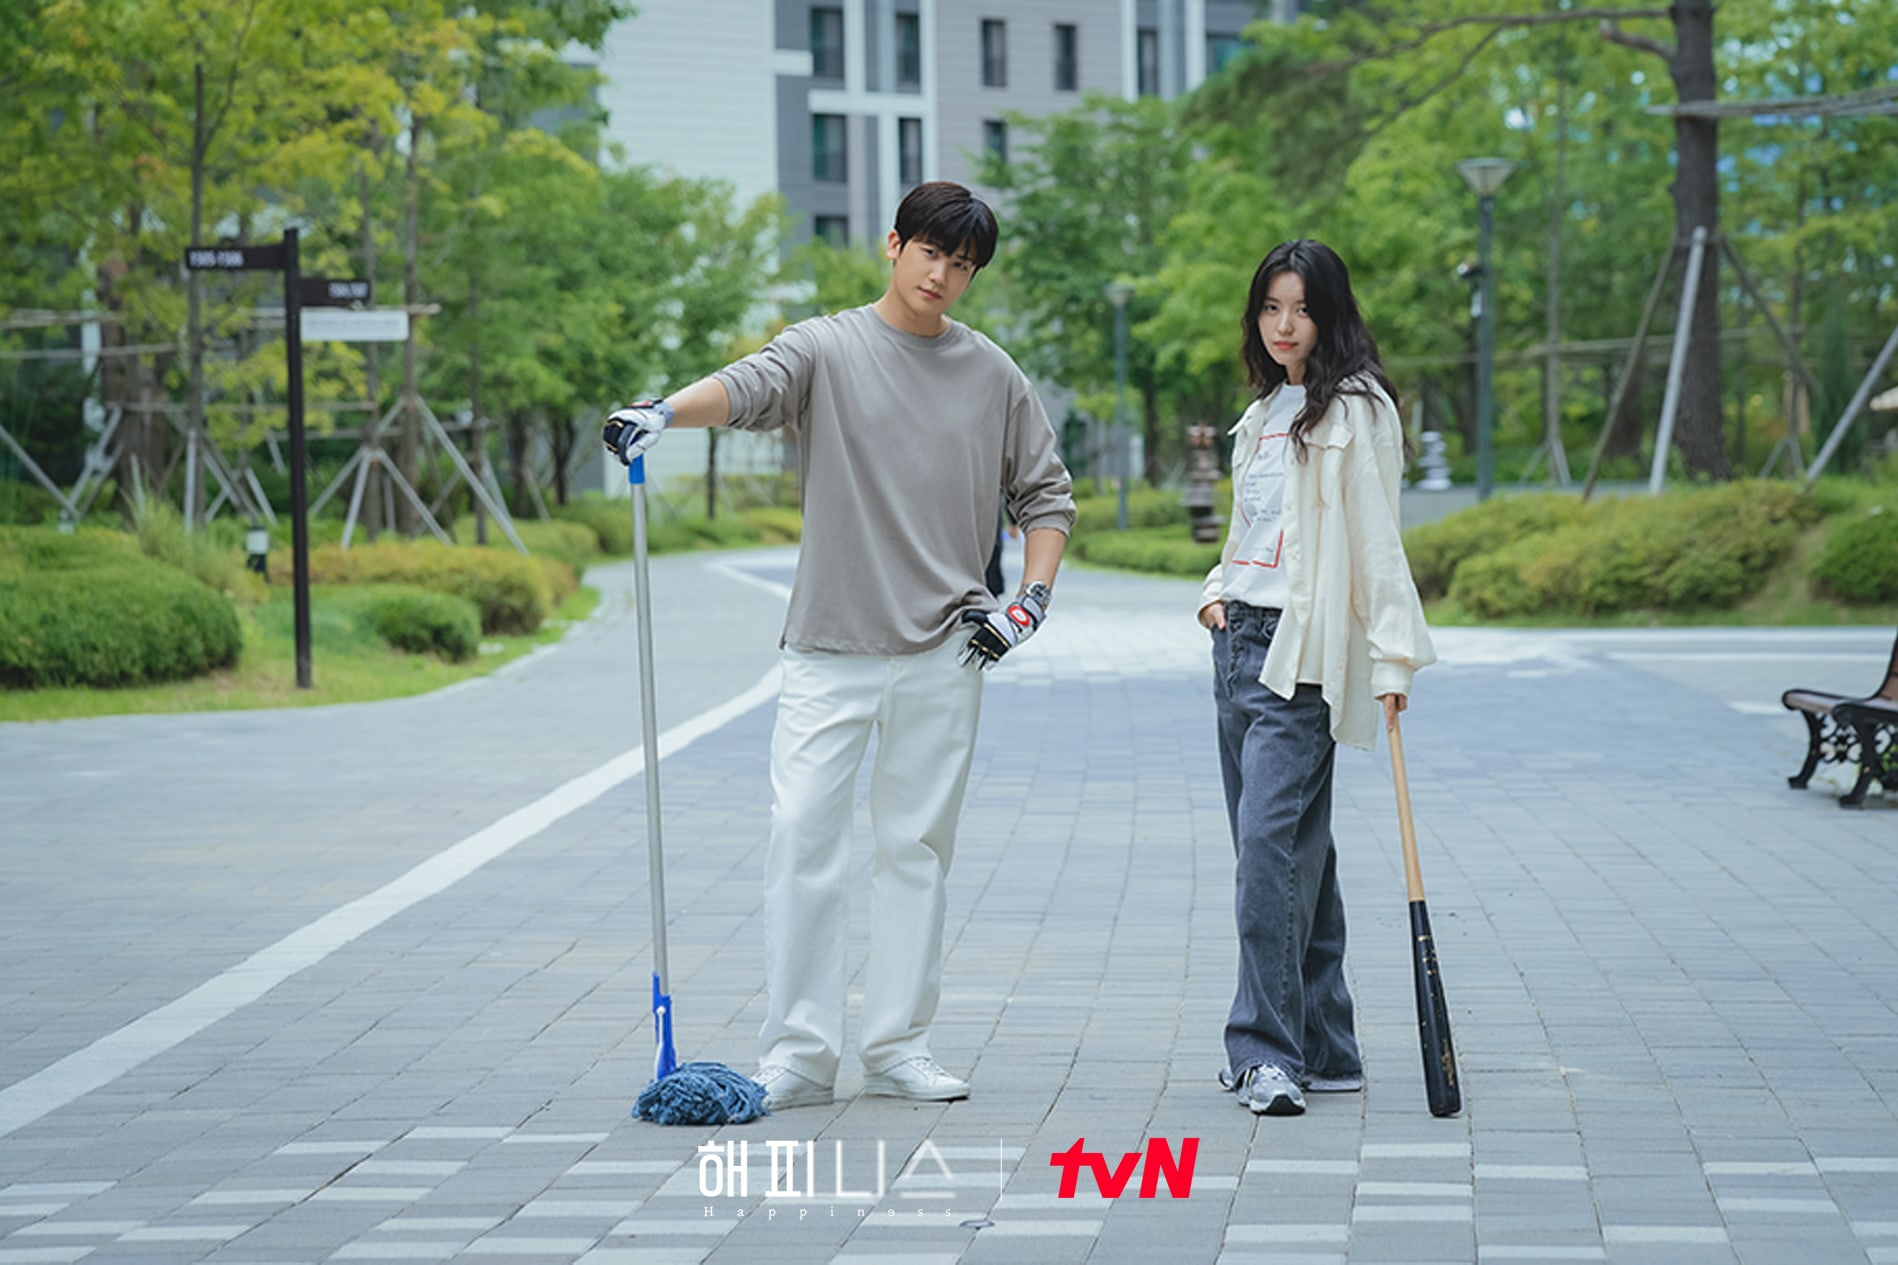 Happiness” Prepares To Say Goodbye With New Behind The Scenes Photo Of Park Hyung Sik, Han Hyo Joo, And More